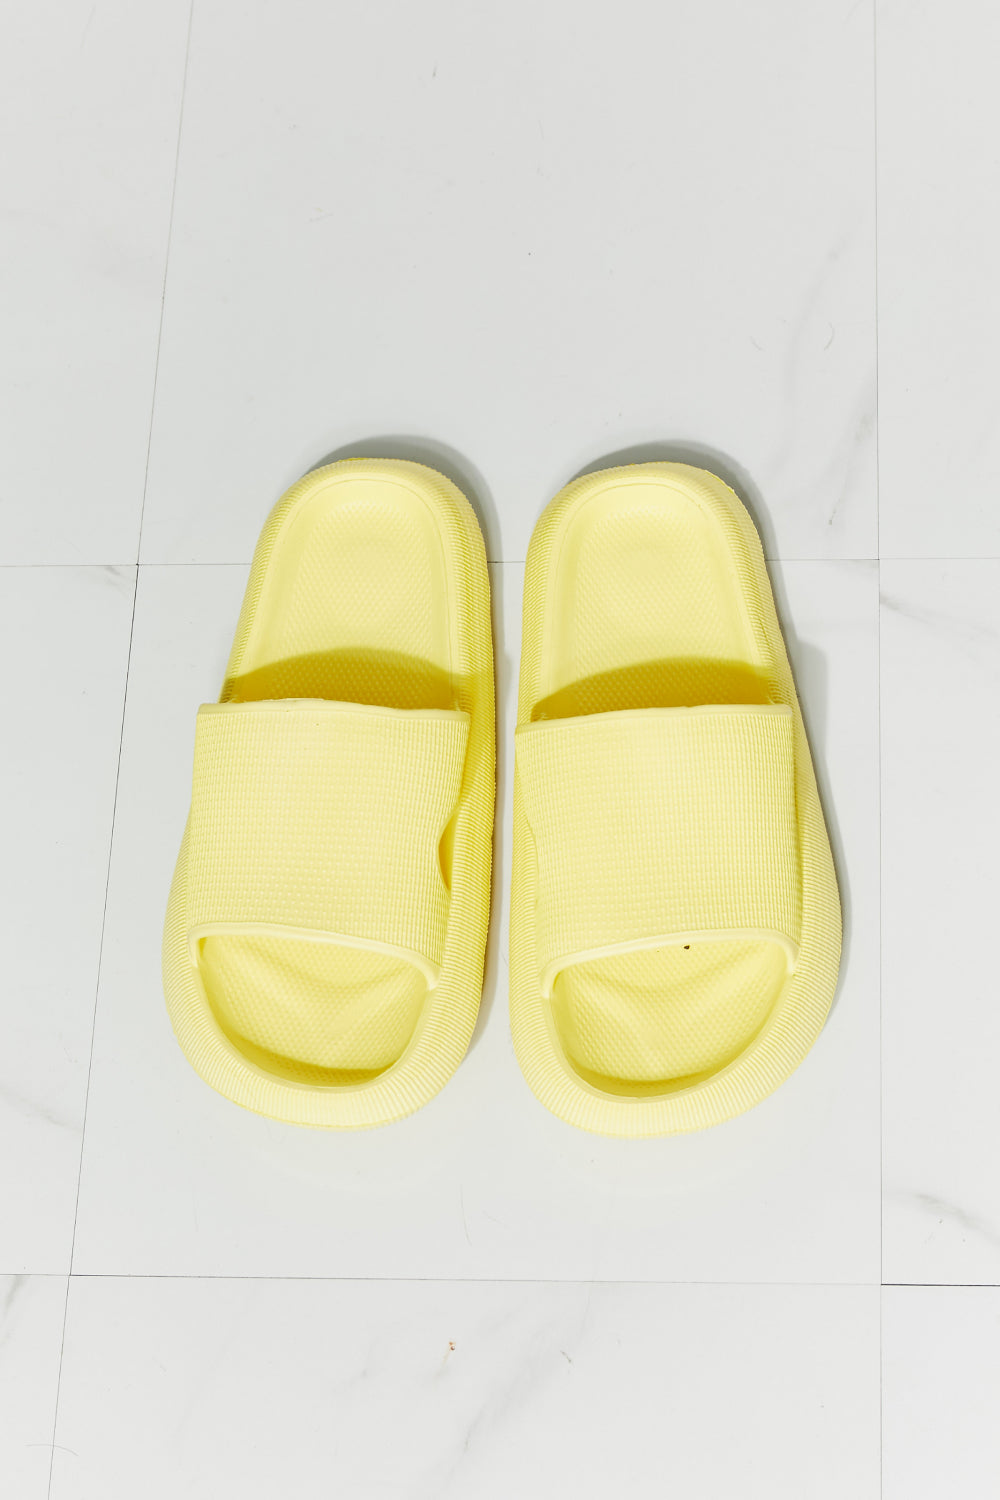 - MMShoes Arms Around Me Open Toe Slide in Yellow - Ships from The US - womens slides at TFC&H Co.